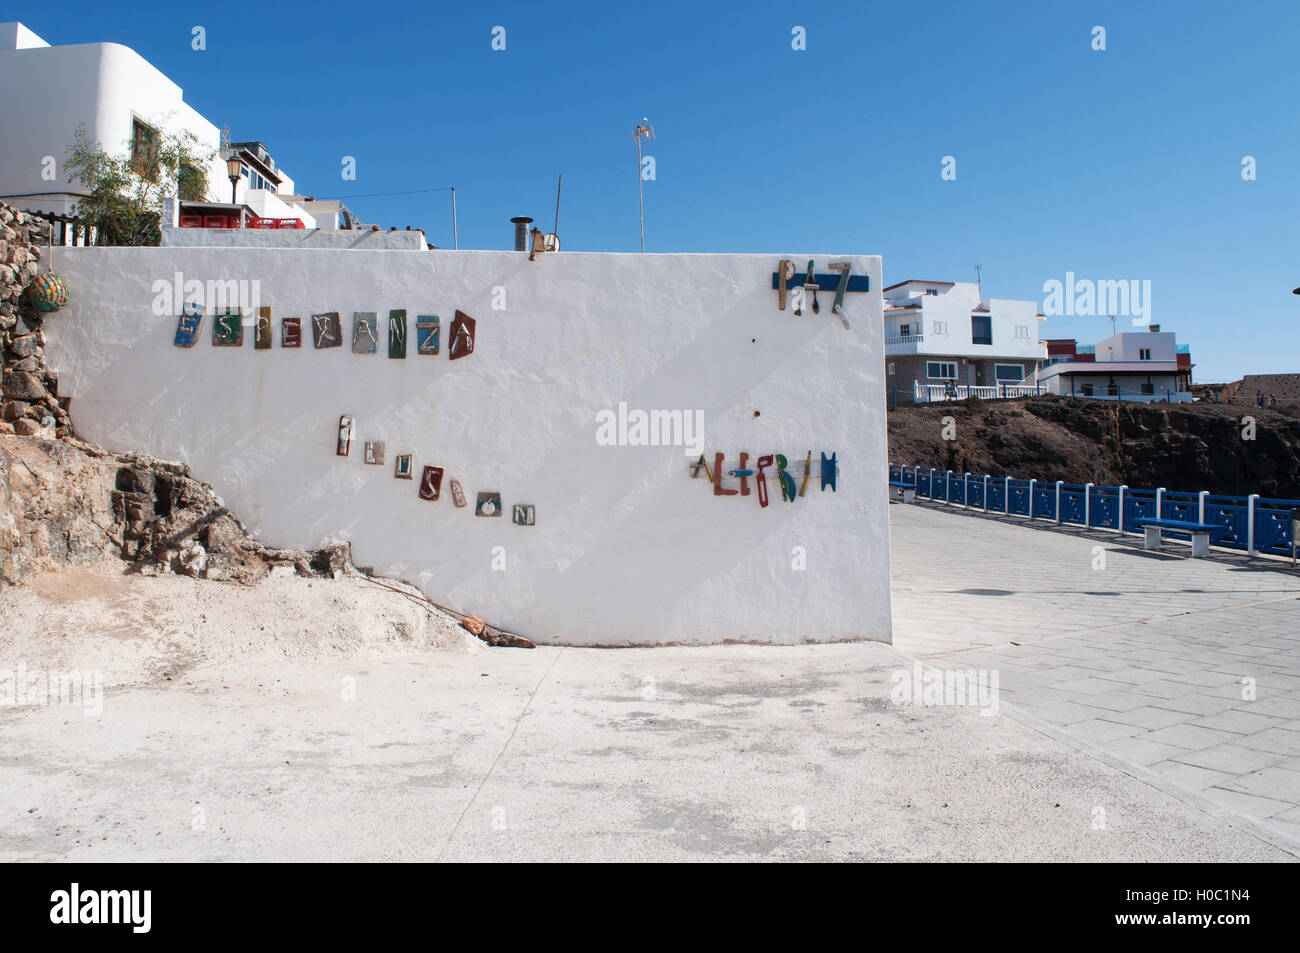 Fuerteventura: the words Hope, Illusion, Peace and Cheerfulness composed in Spanish by pieces of old boats on white wall in the village of El Cotillo Stock Photo